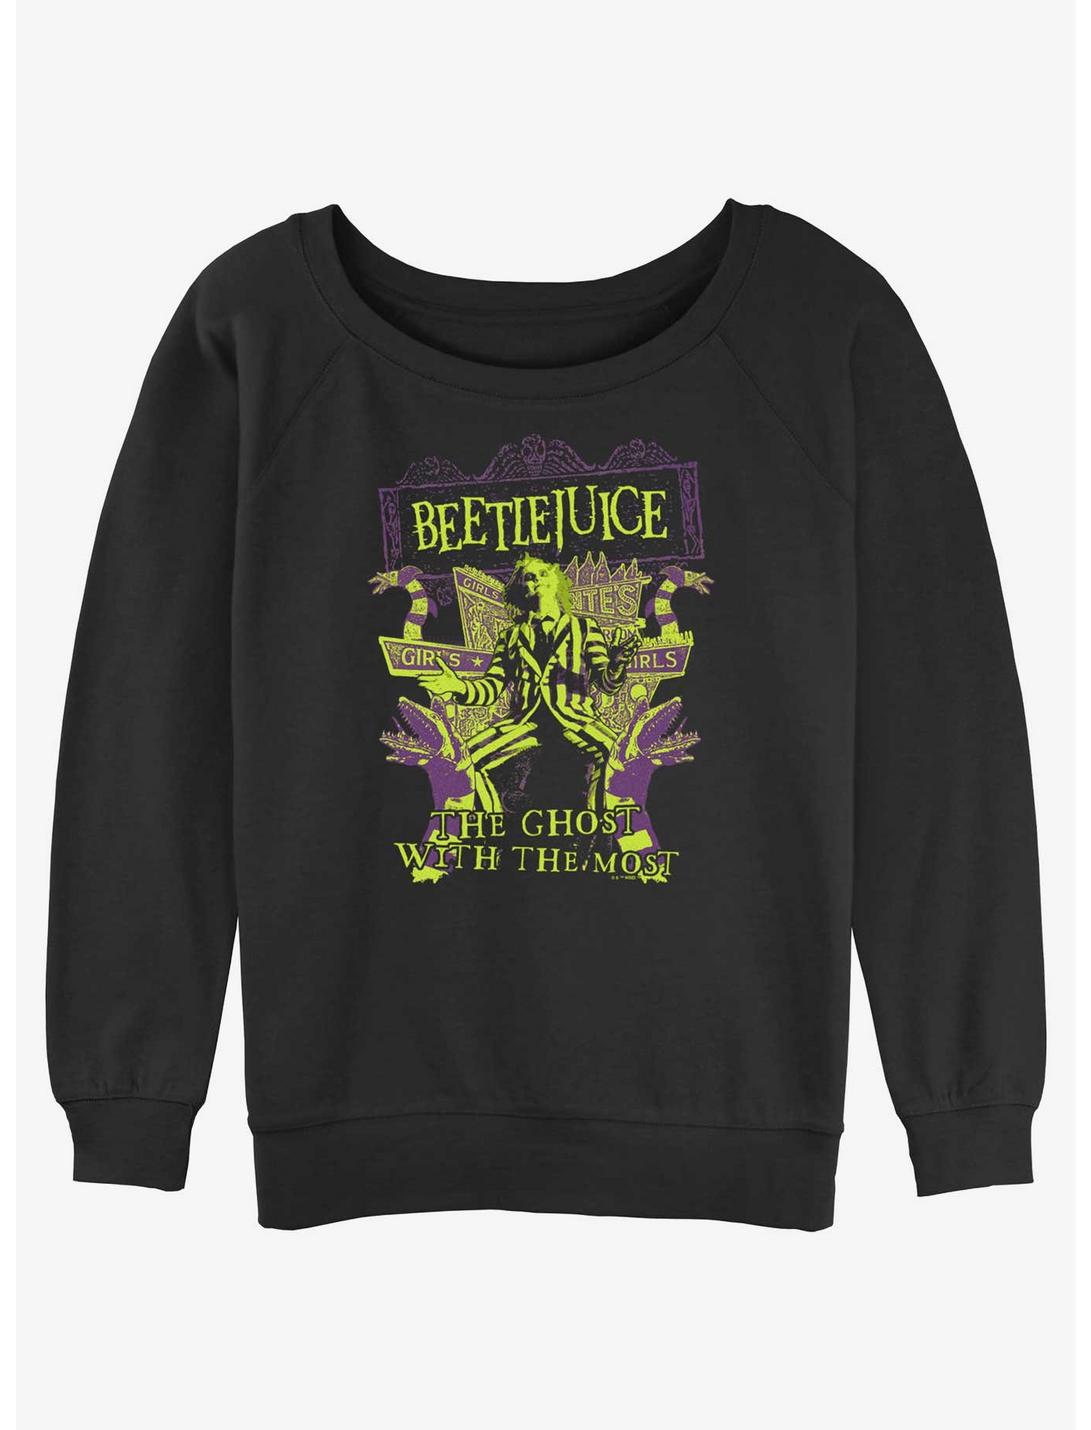 Beetlejuice Ghost With The Most Girls Slouchy Sweatshirt, BLACK, hi-res